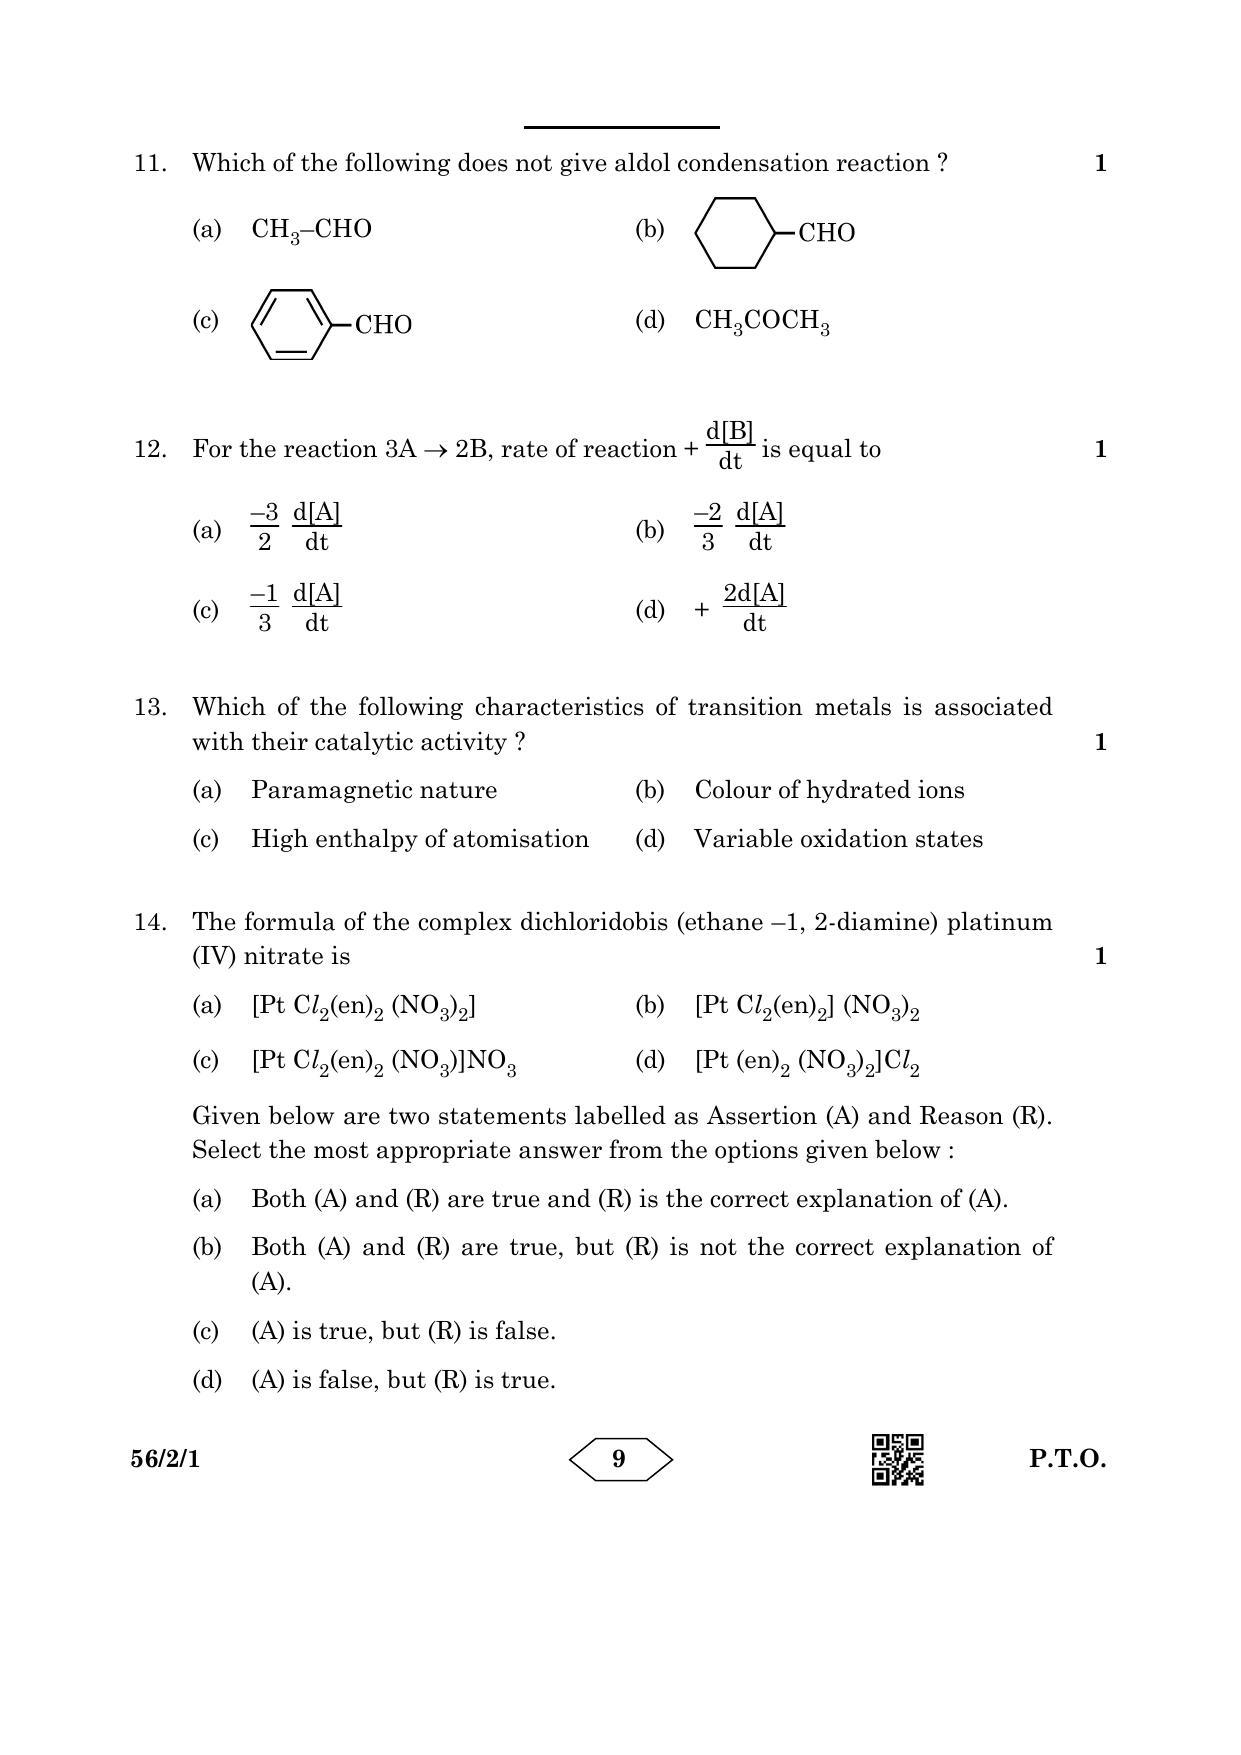 CBSE Class 12 56-2-1 Chemistry 2023 Question Paper - Page 9